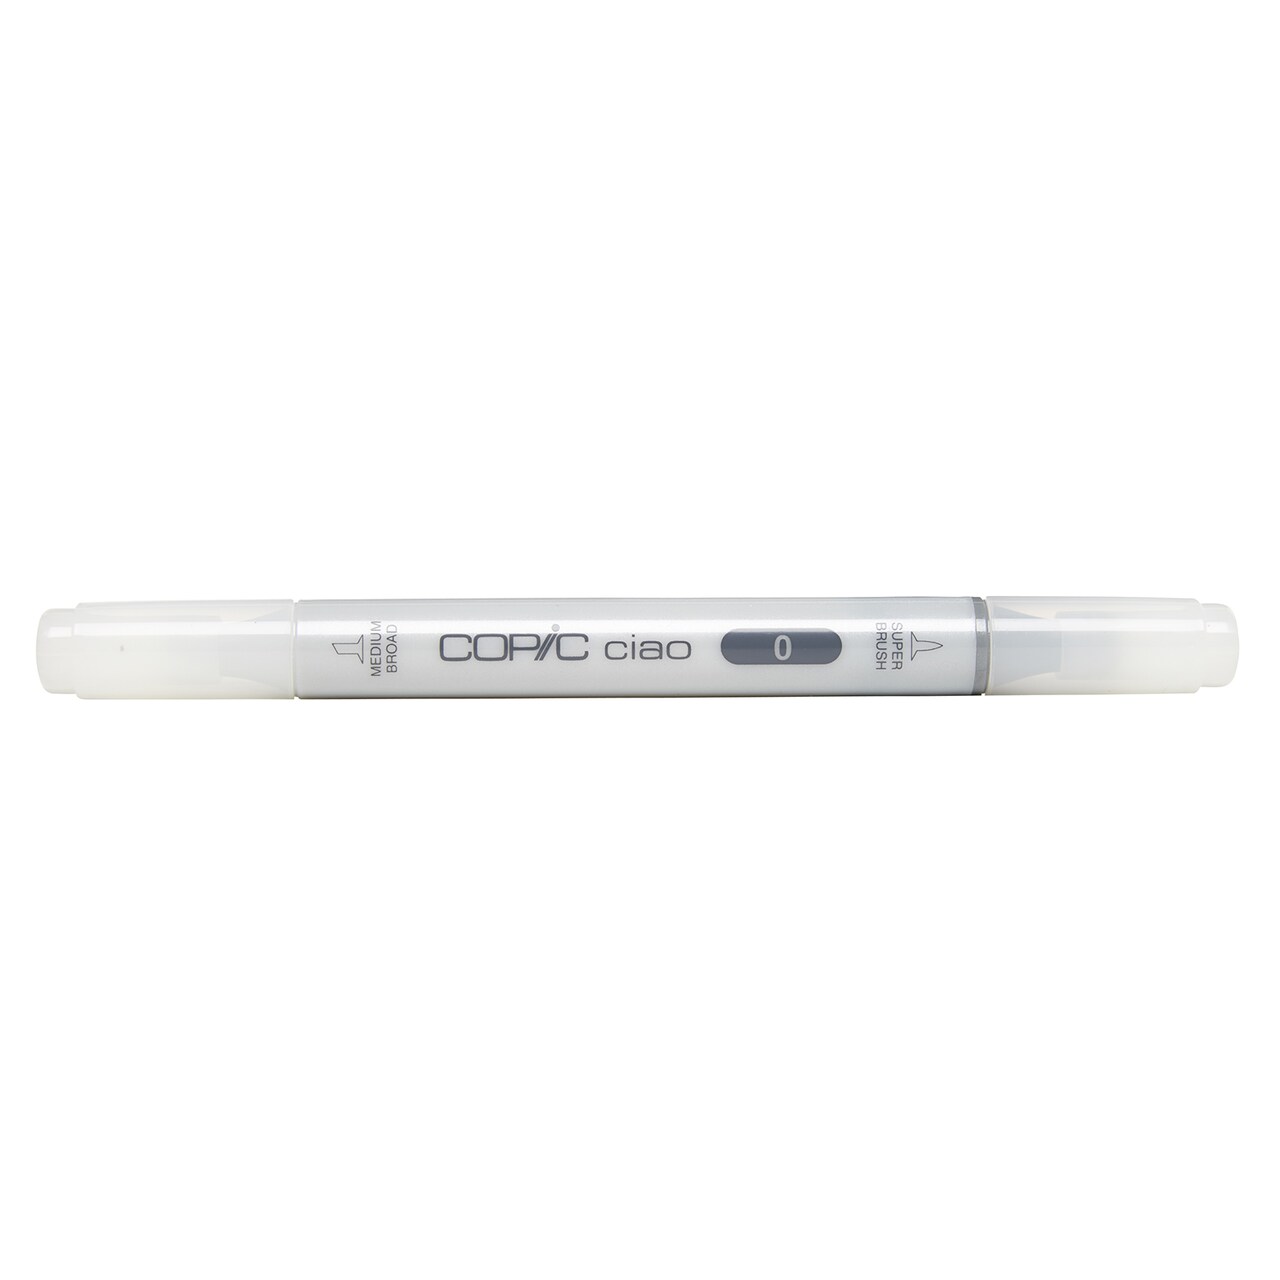 Copic Ciao Marker, Colorless Blender